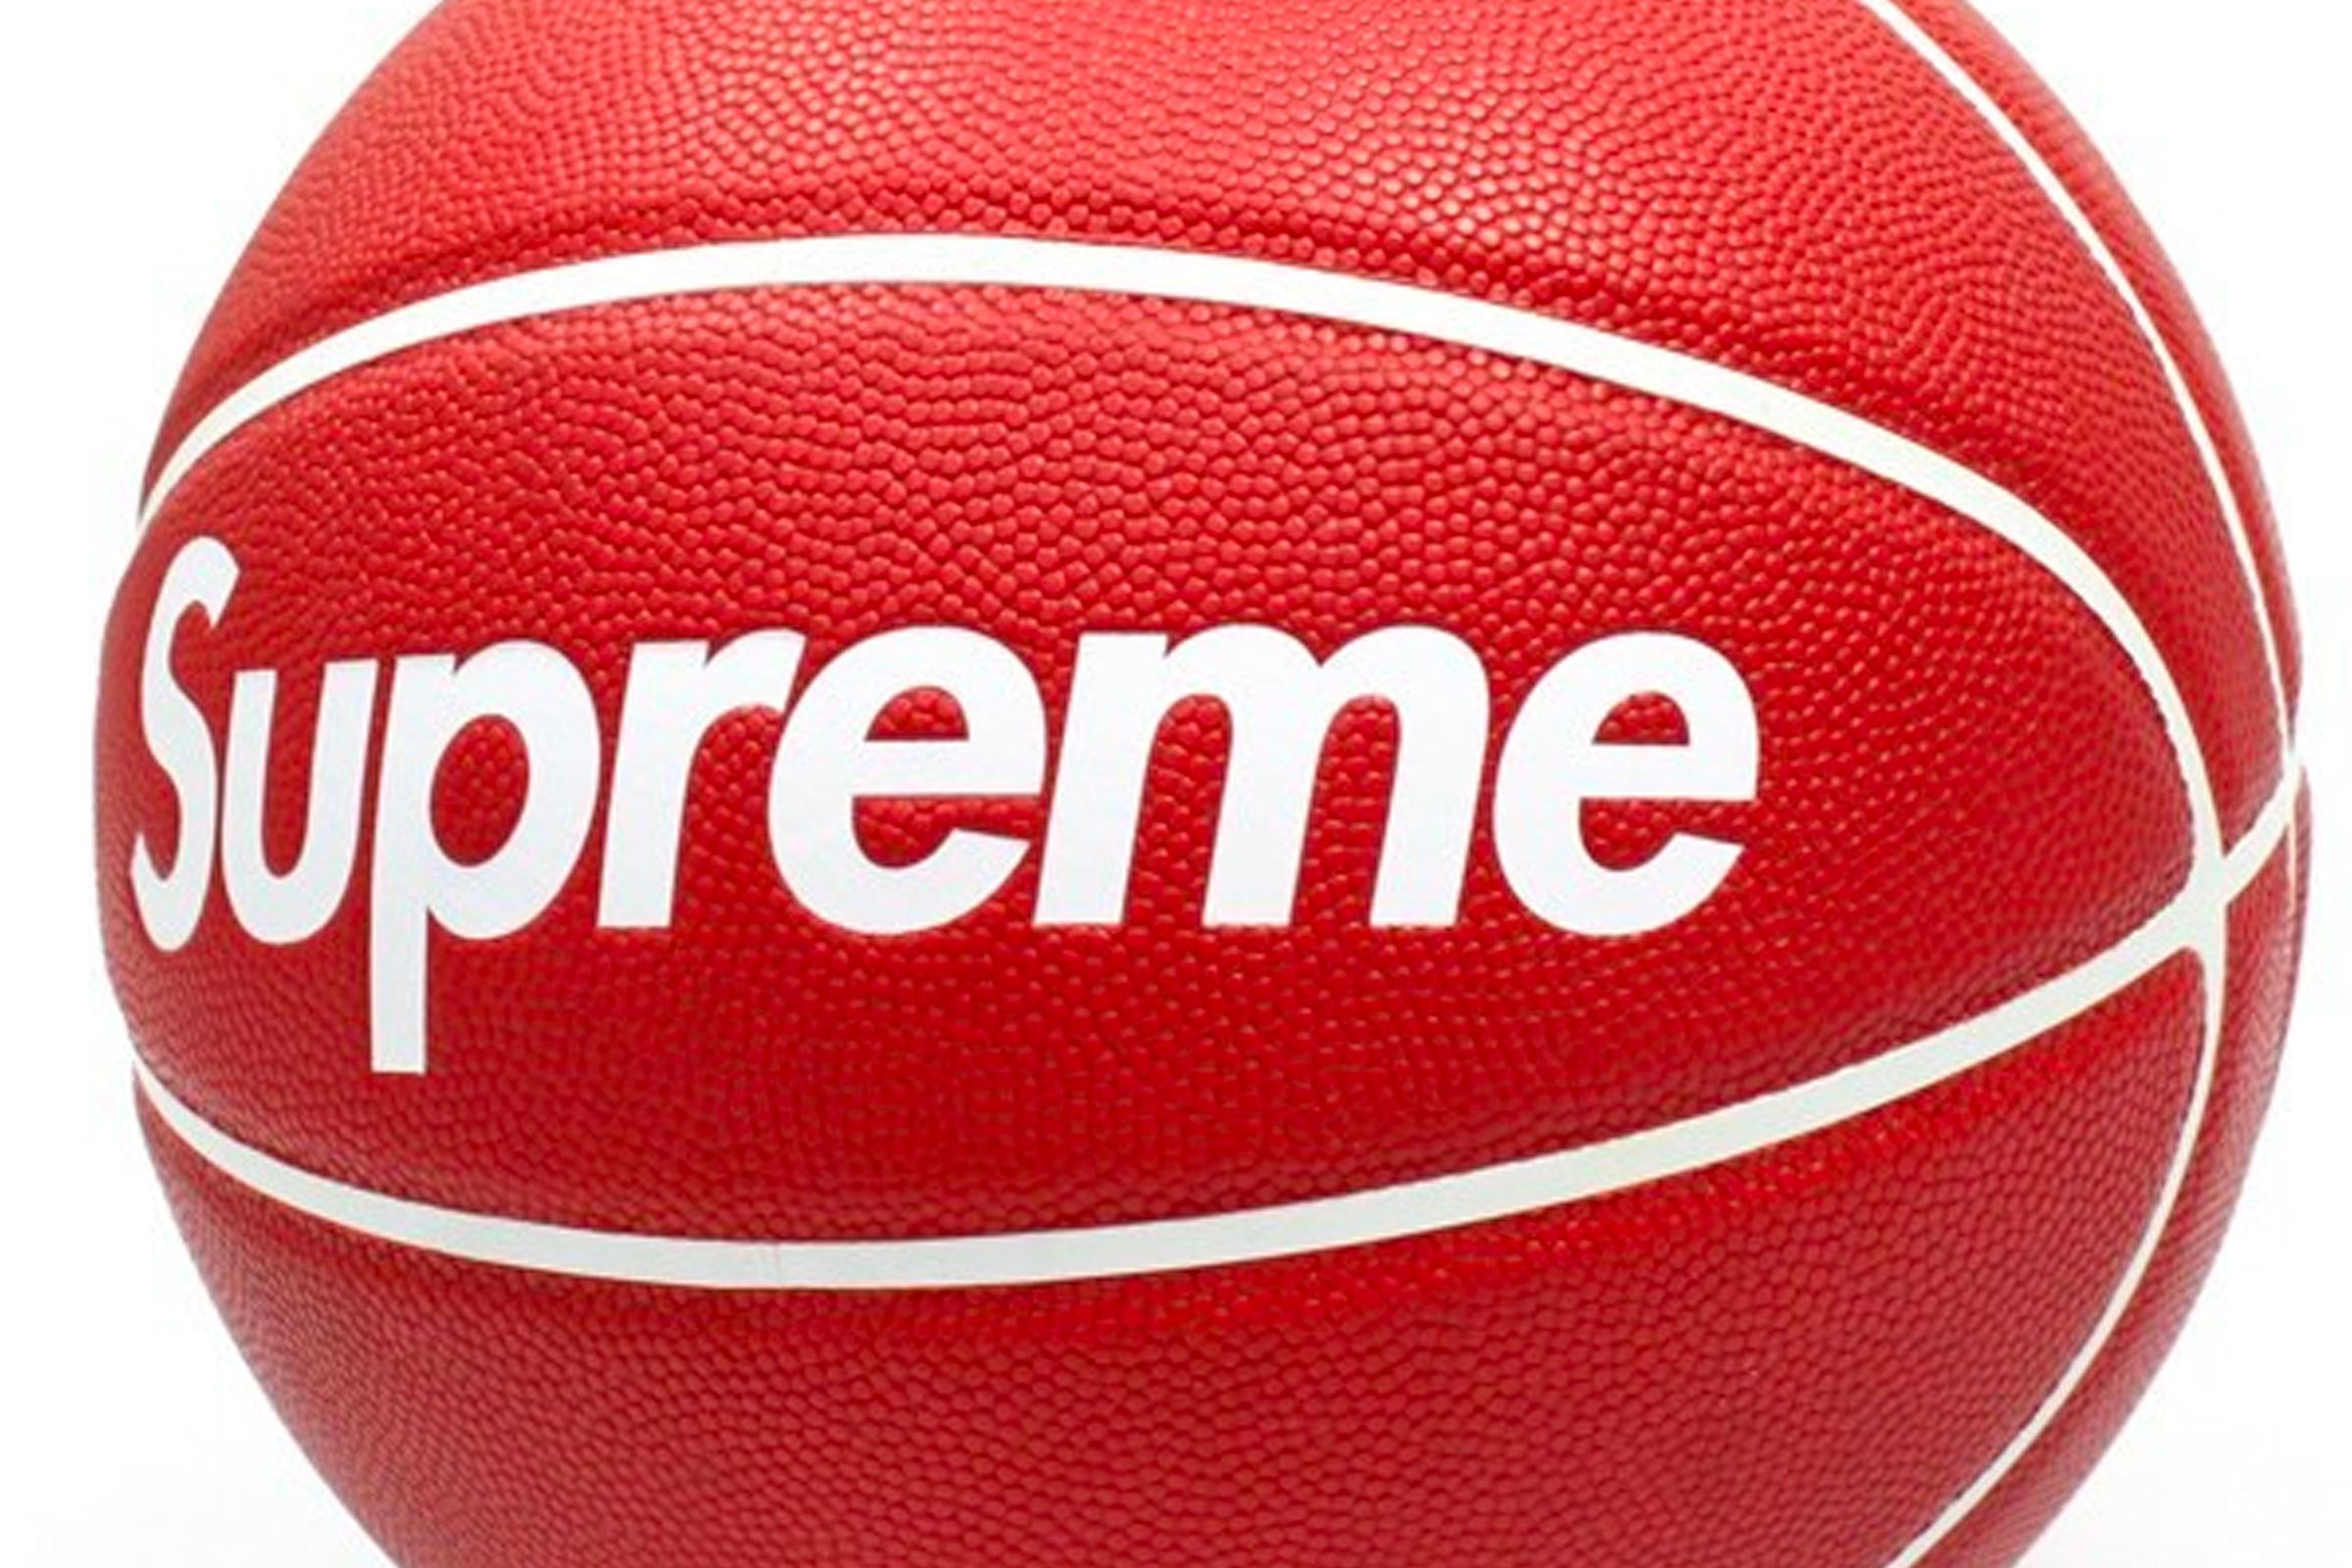 In Hypebeast Homes, Supreme Accessories Are the Hot Decor Trend